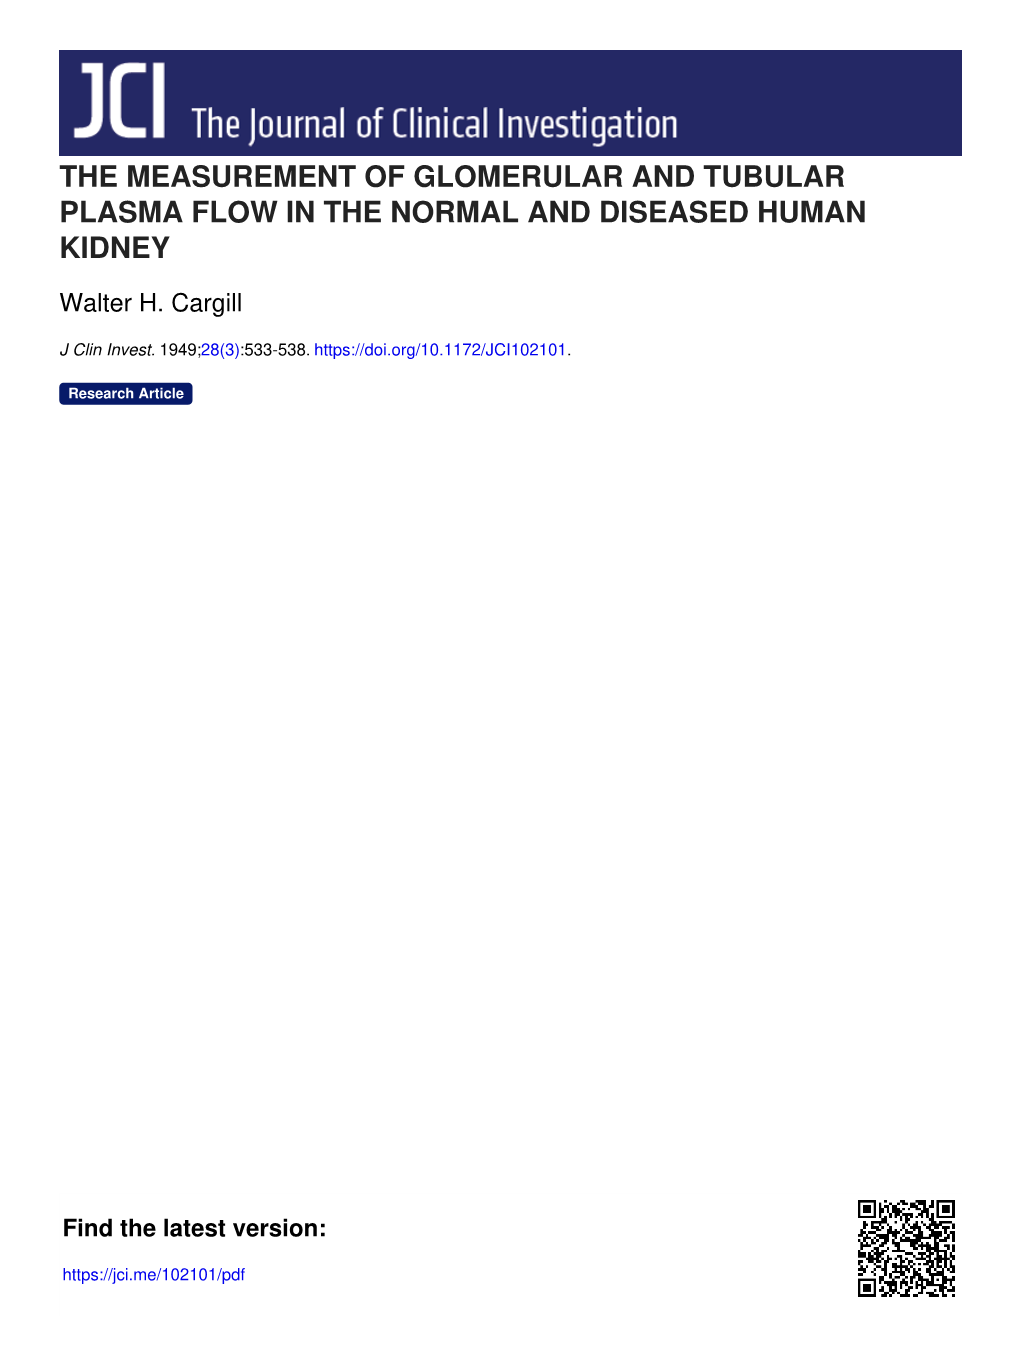 The Measurement of Glomerular and Tubular Plasma Flow in the Normal and Diseased Human Kidney